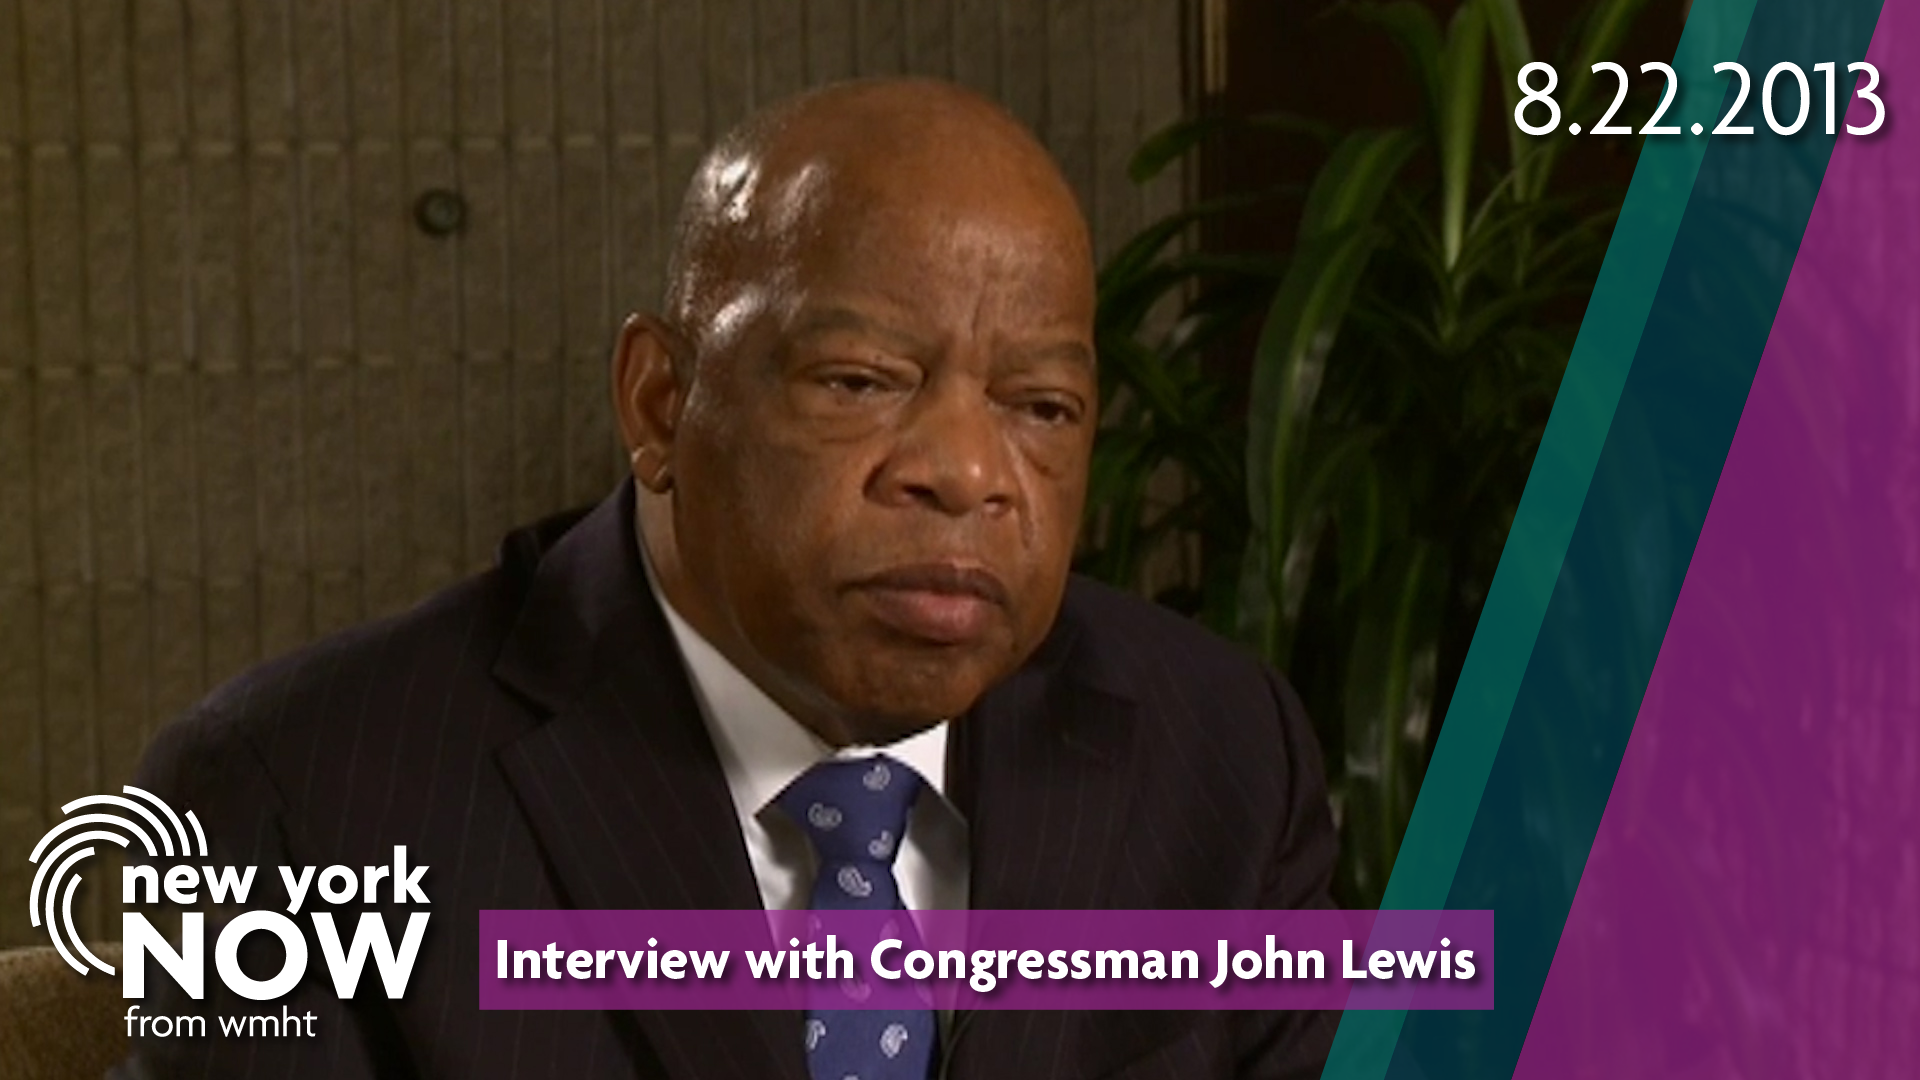 The late Congressman John Lewis sits attentively during an interview on New York NOW in 2013.